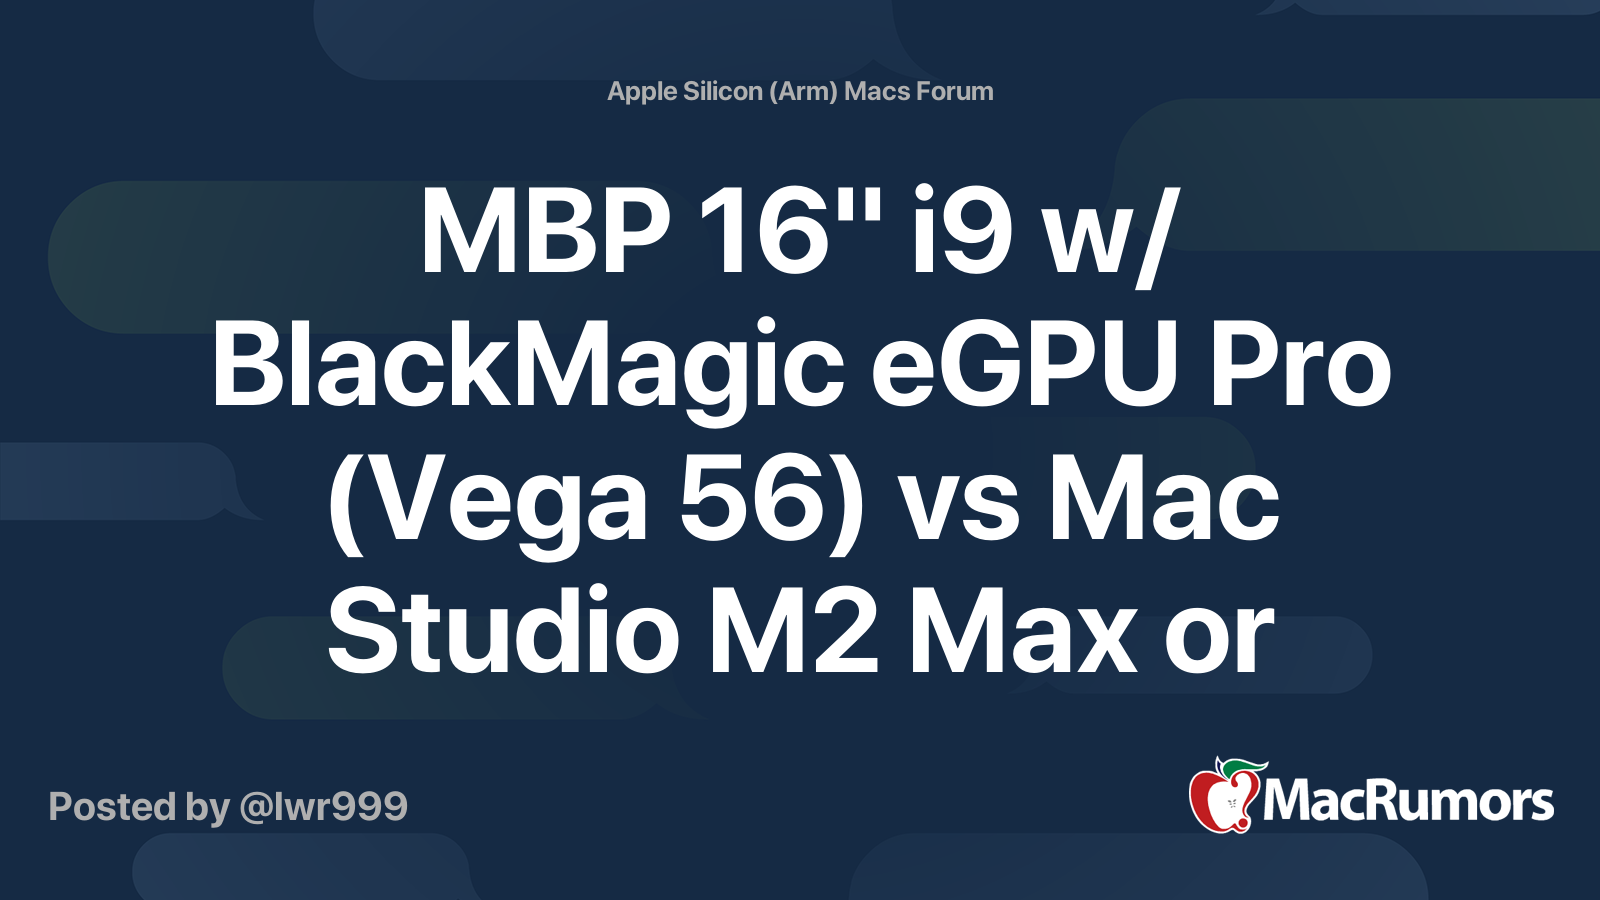 How Well Does WoW Run on Apple's M1 Pro? - News - Icy Veins